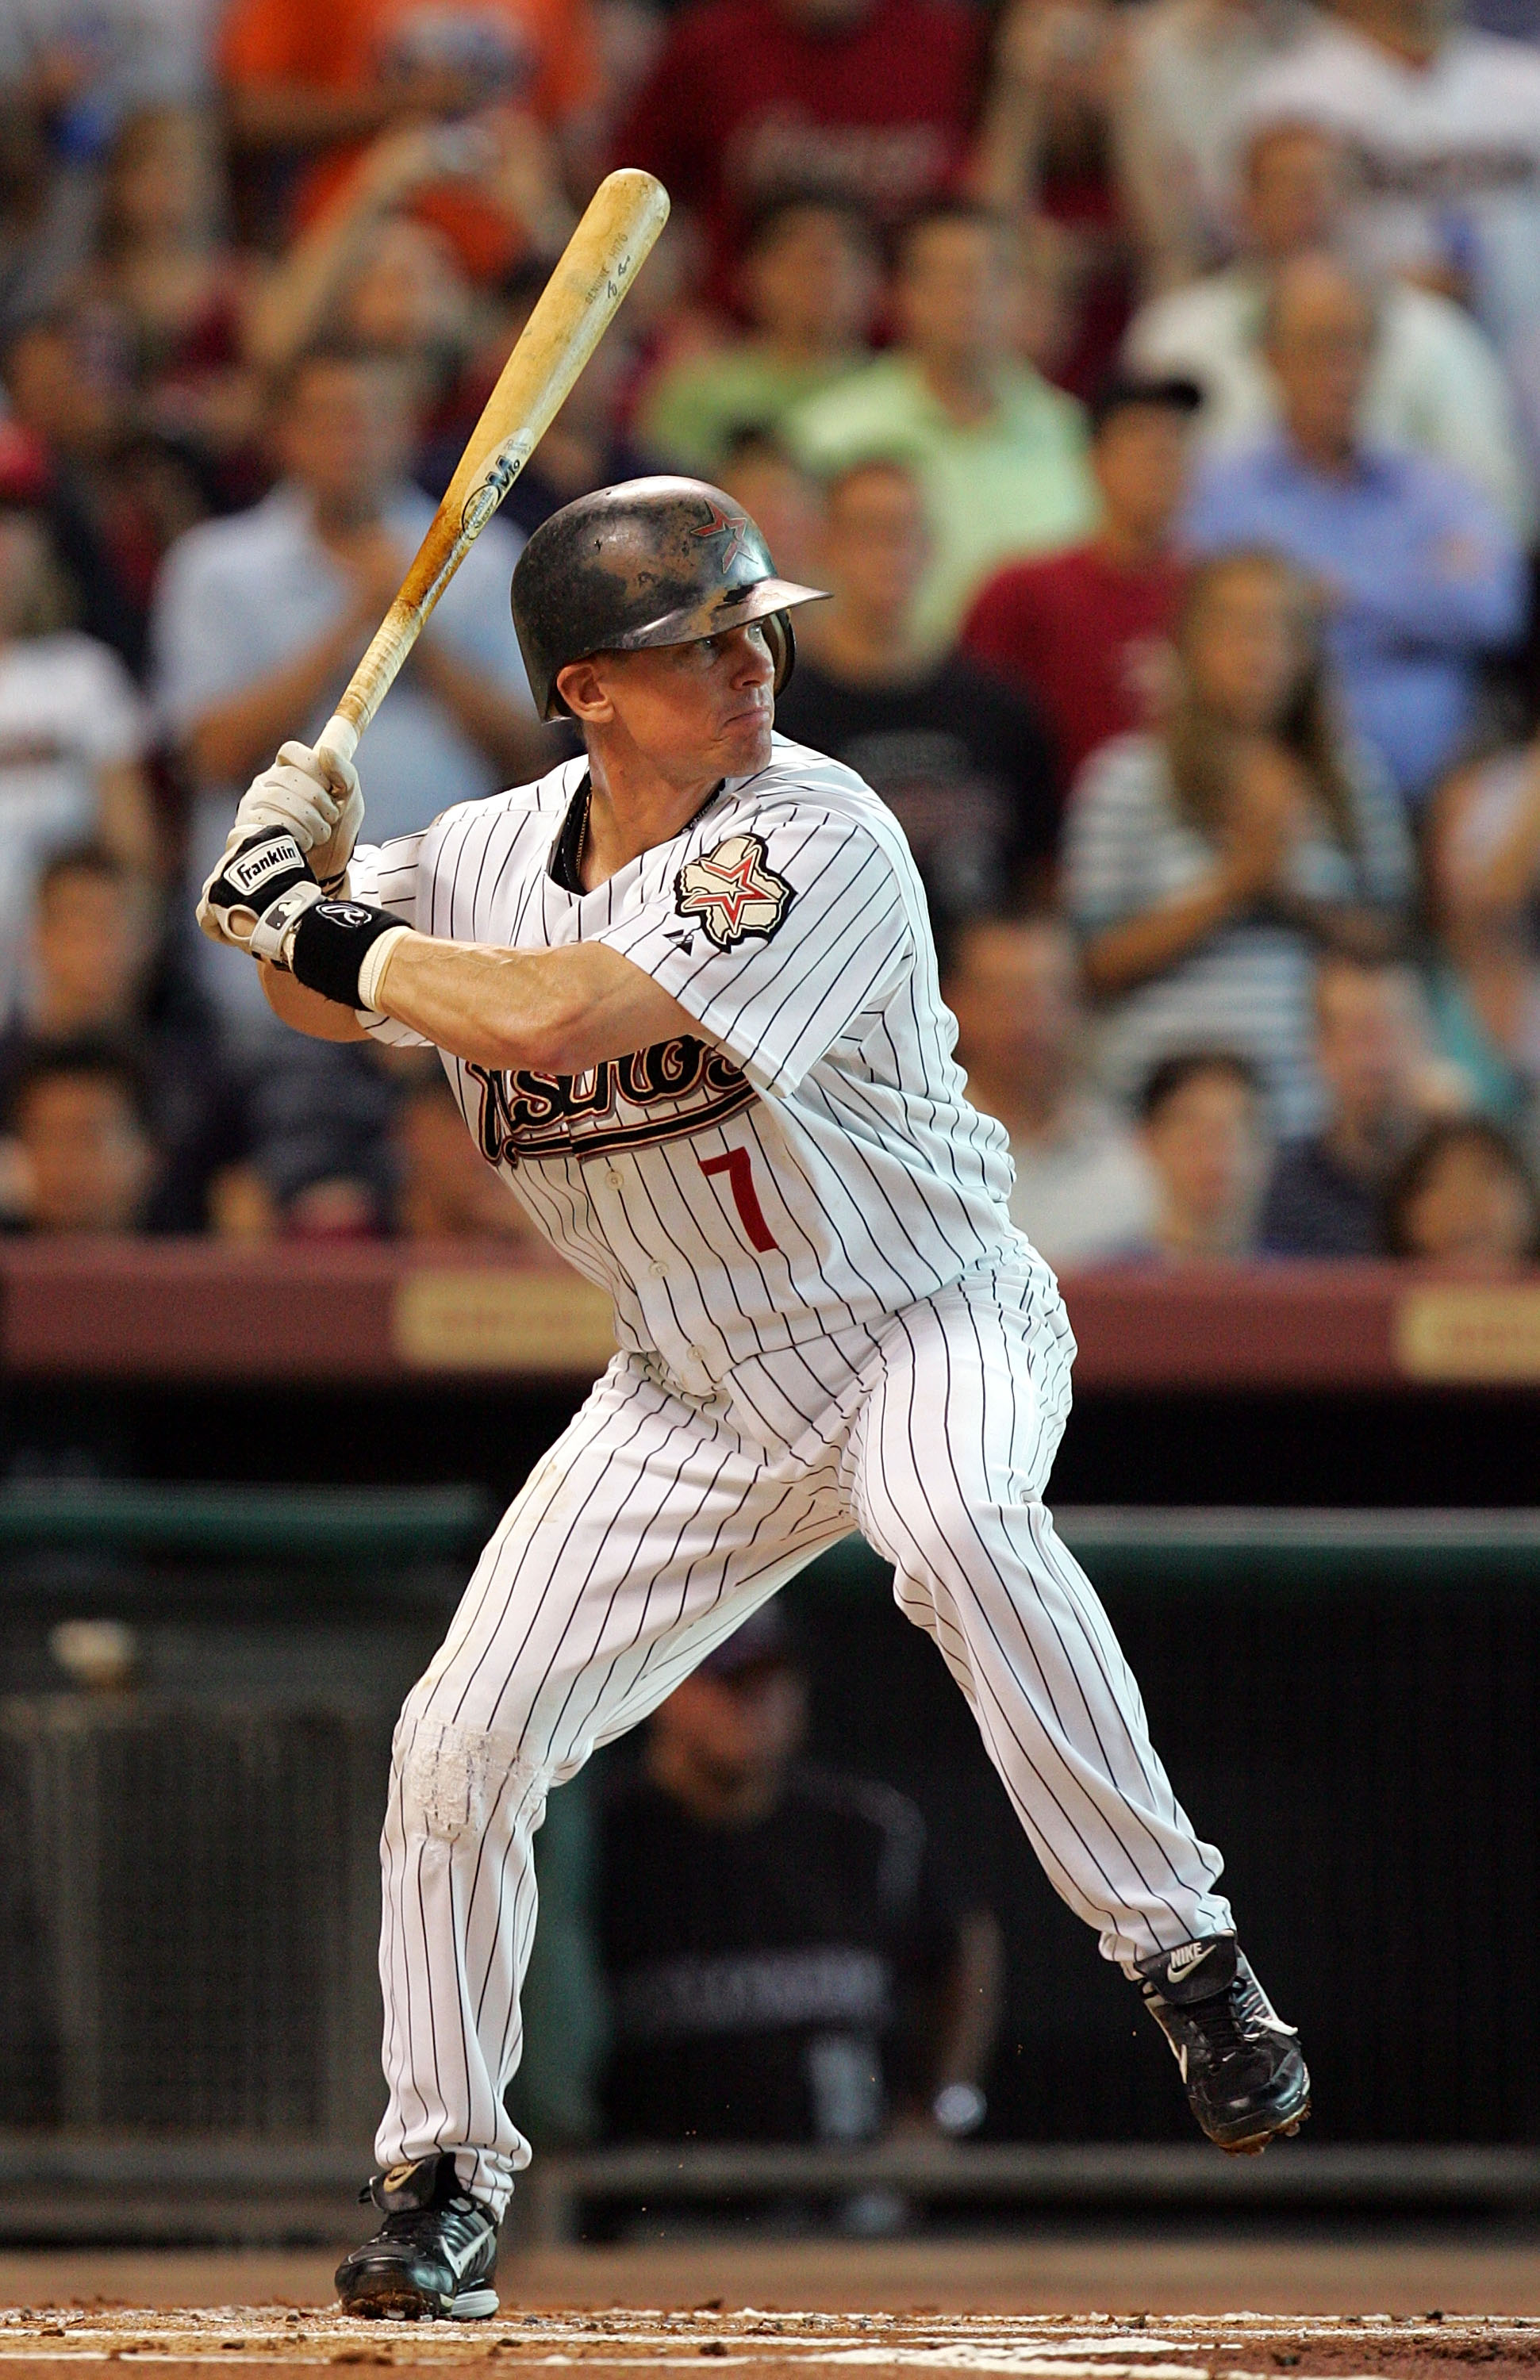 HOUSTON - JUNE 28:  Second baseman Craig Biggio #7 of the Houston Astros at bat against the Colorado Rockies in the first inning on June 28, 2007 at Minute Maid Park in Houston, Texas.  (Photo by Ronald Martinez/Getty Images)